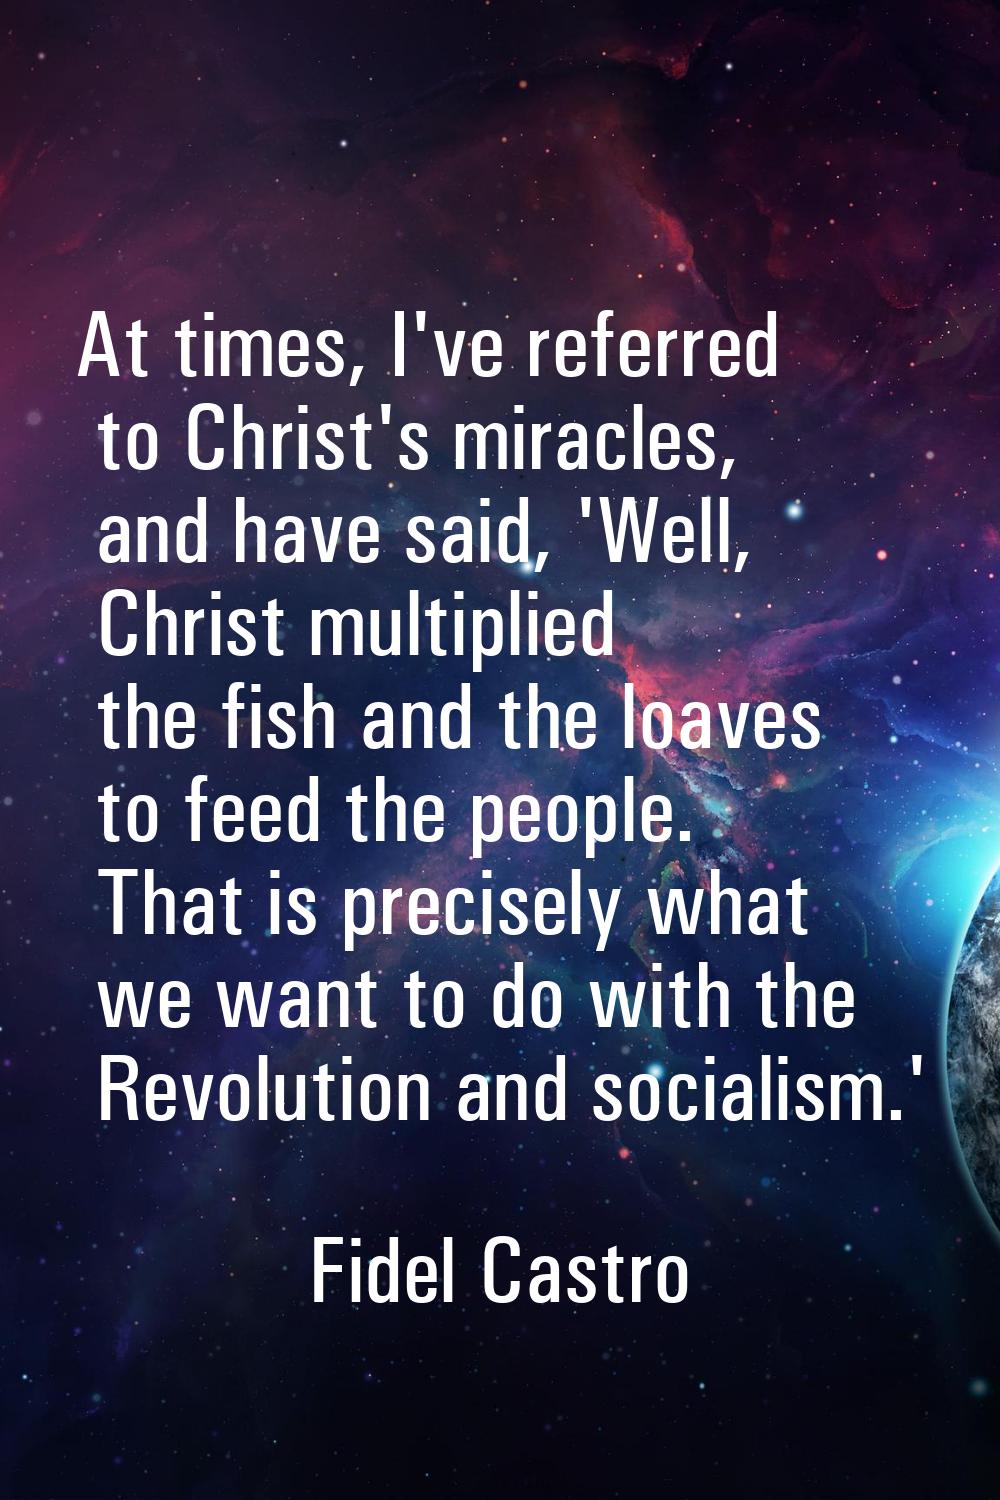 At times, I've referred to Christ's miracles, and have said, 'Well, Christ multiplied the fish and 